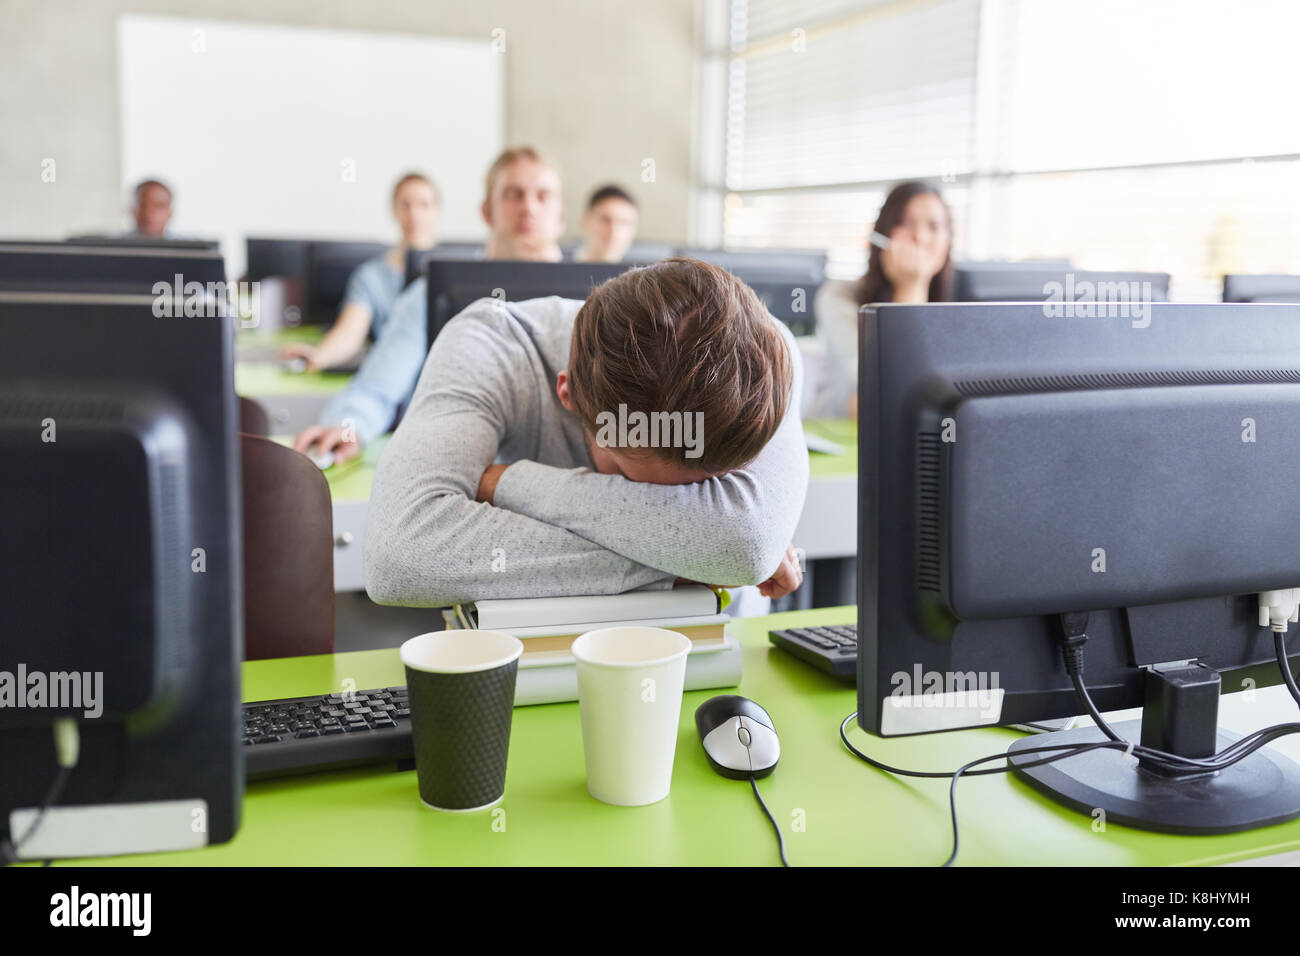 Student with Burnout and exhaustion in computer course at university Stock Photo